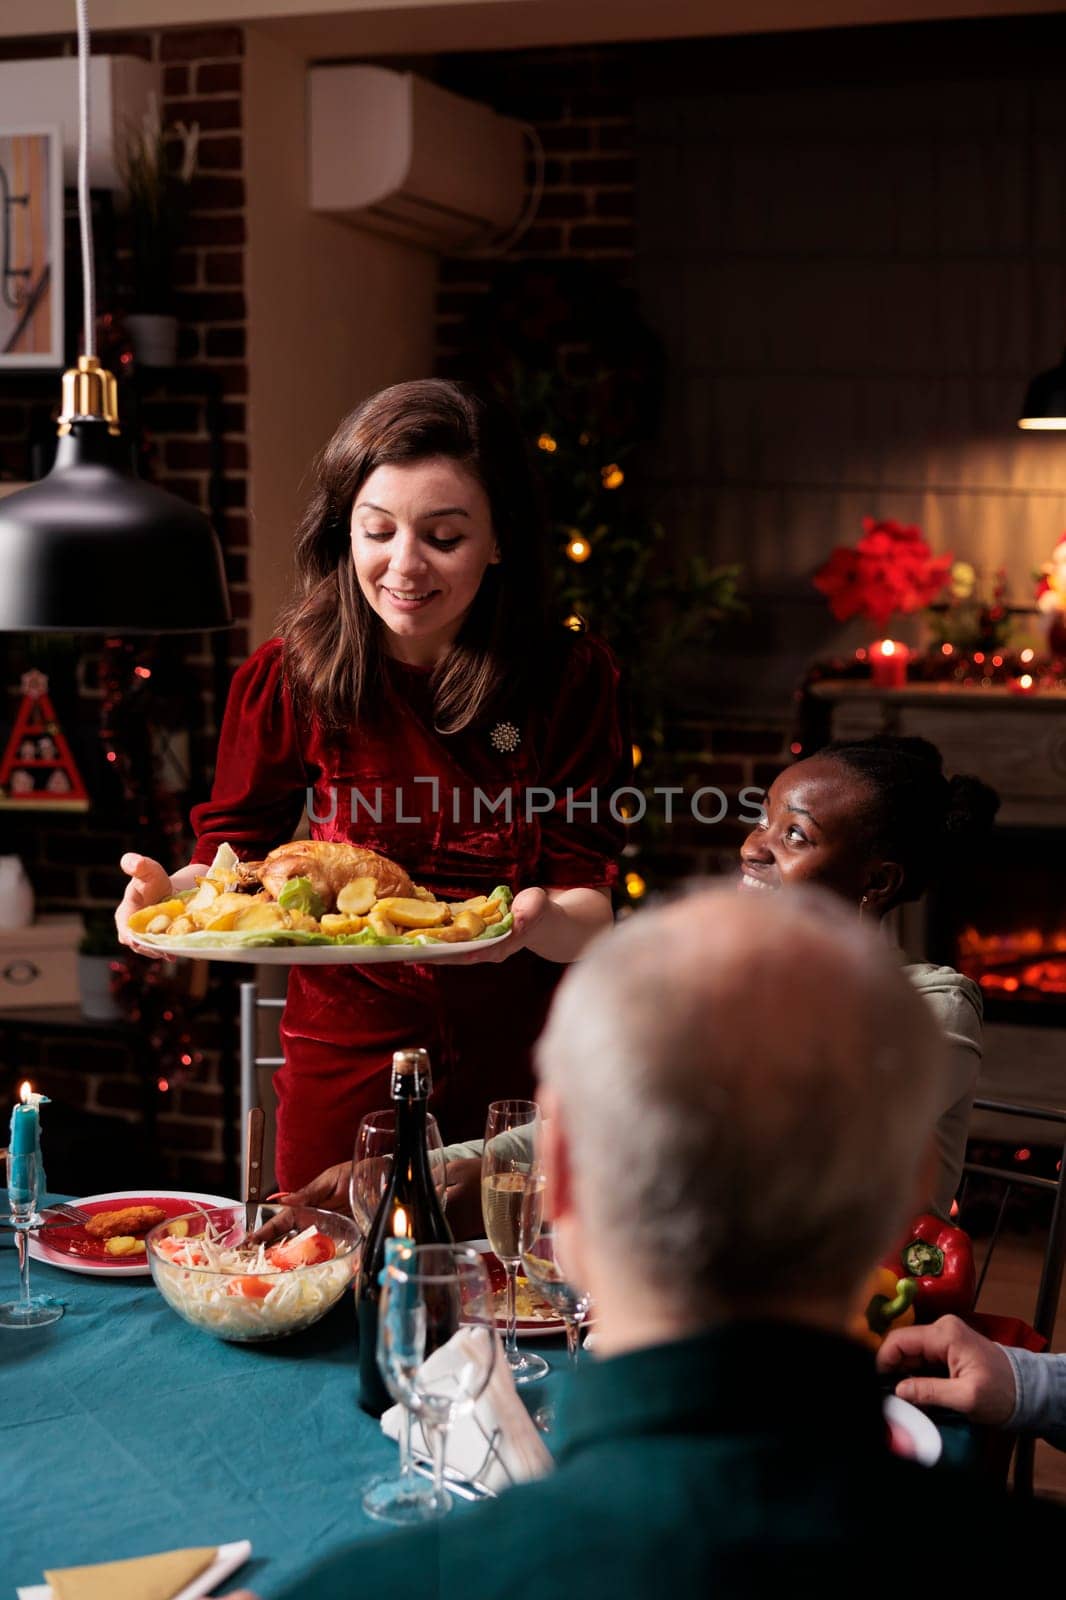 Woman putting festive food on table, enjoying christmas dinner and seasonal celebration with diverse friends and family at home. People feeling happy eating homemade meal and drinking alcohol.